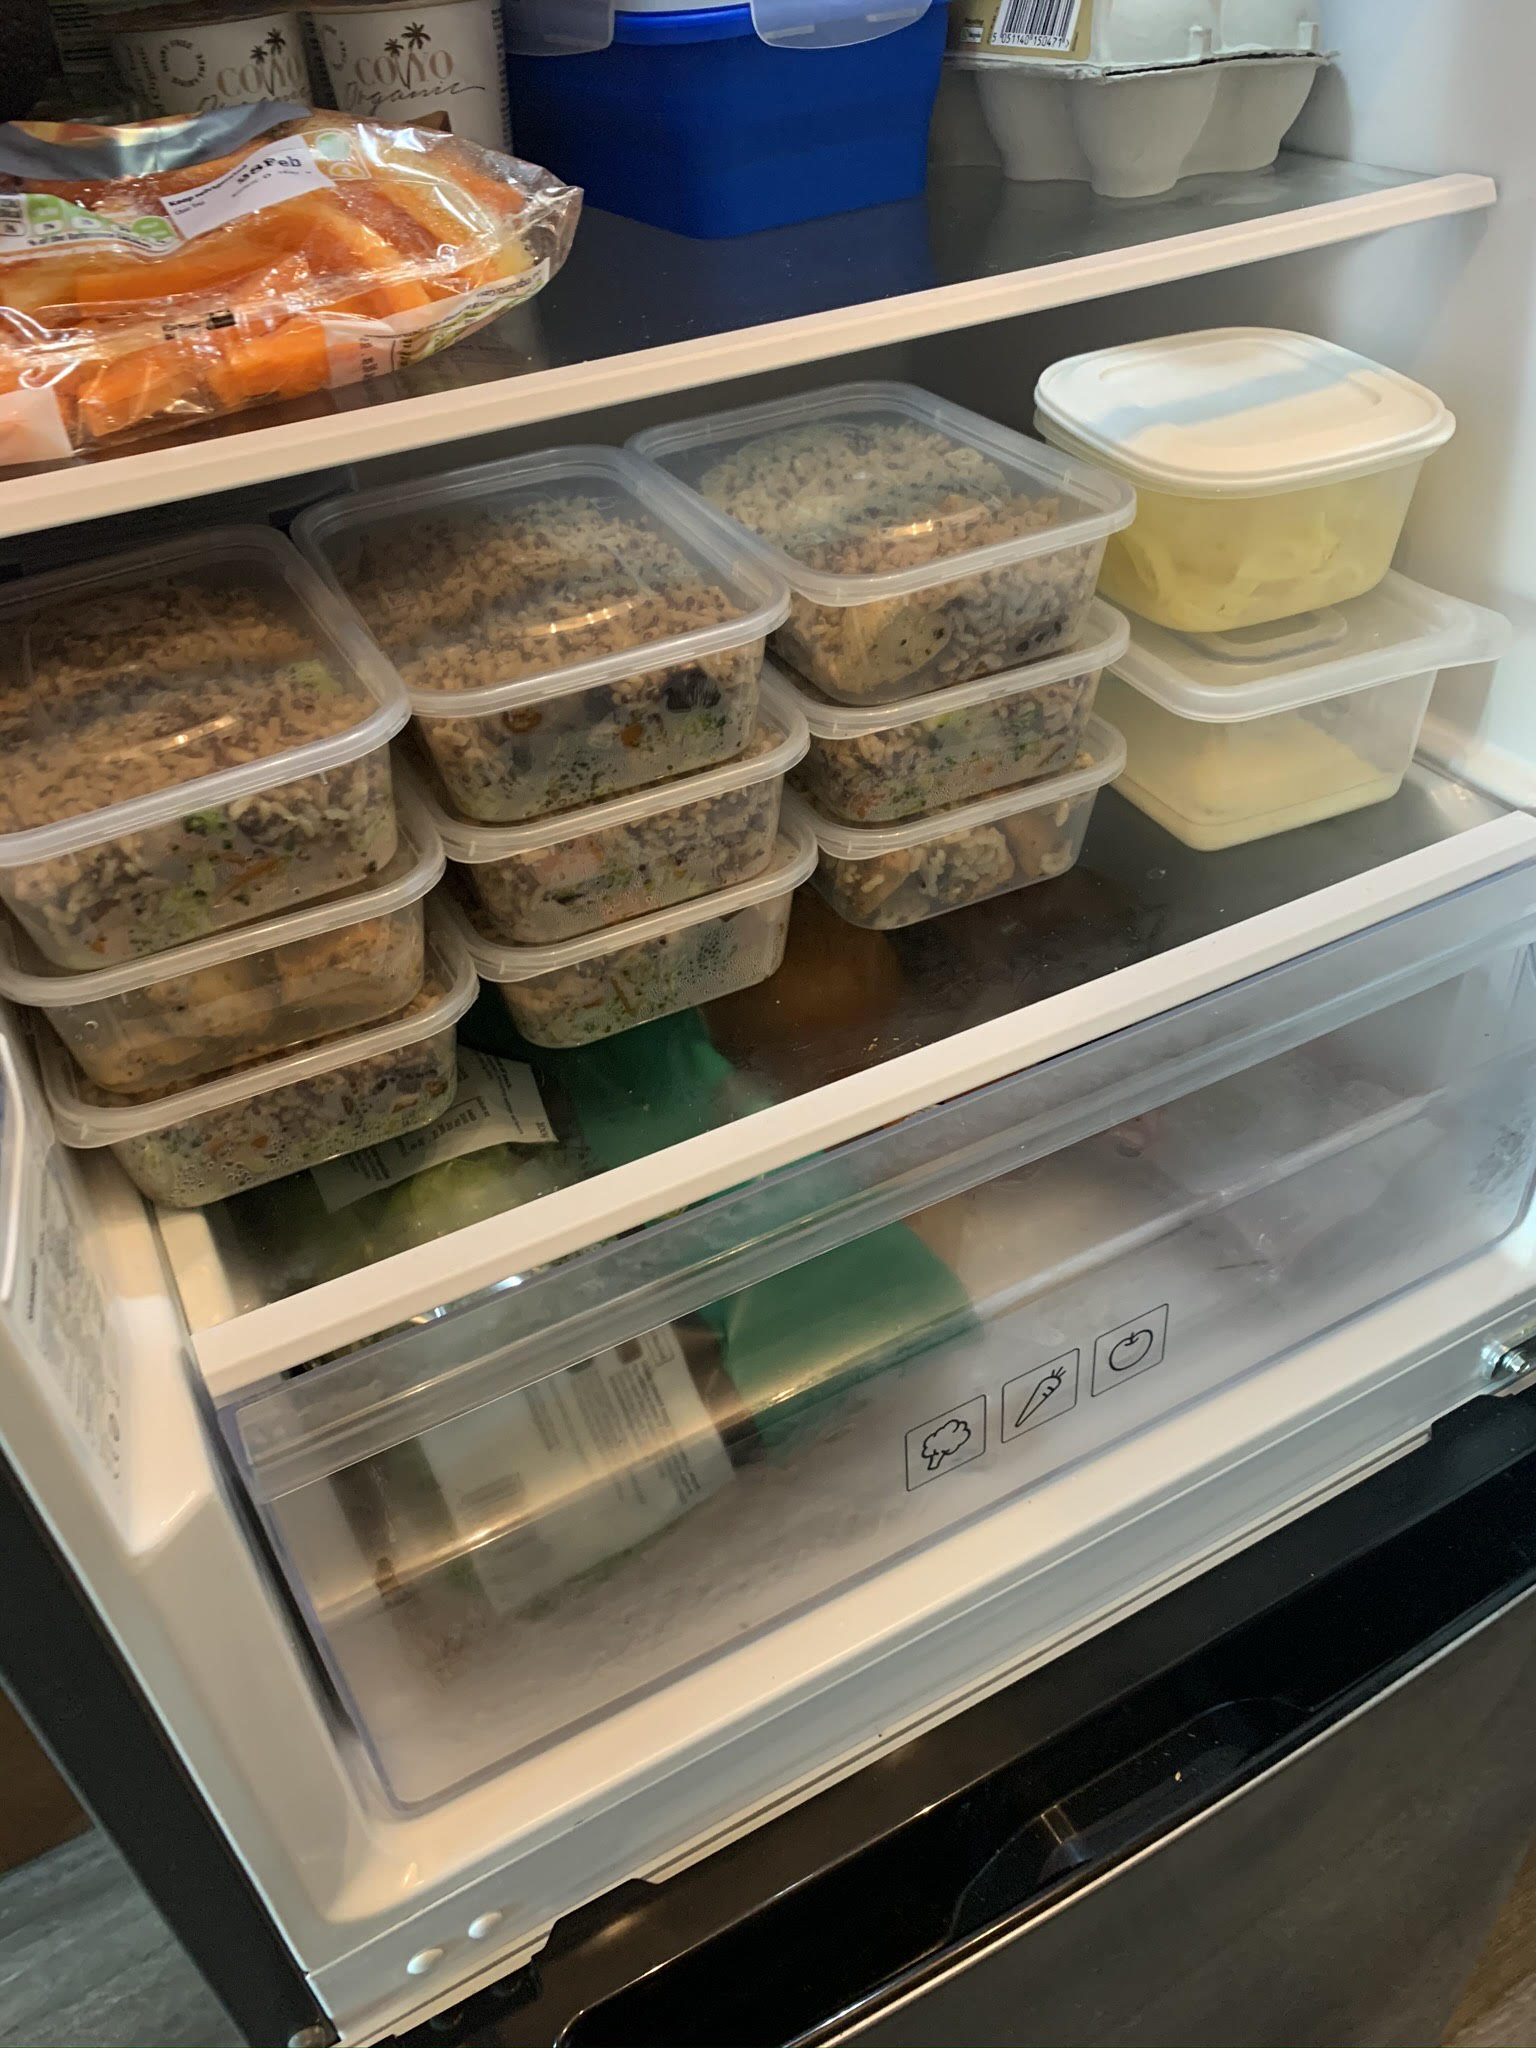 An open fridge with quite a few plastic containers full of food.